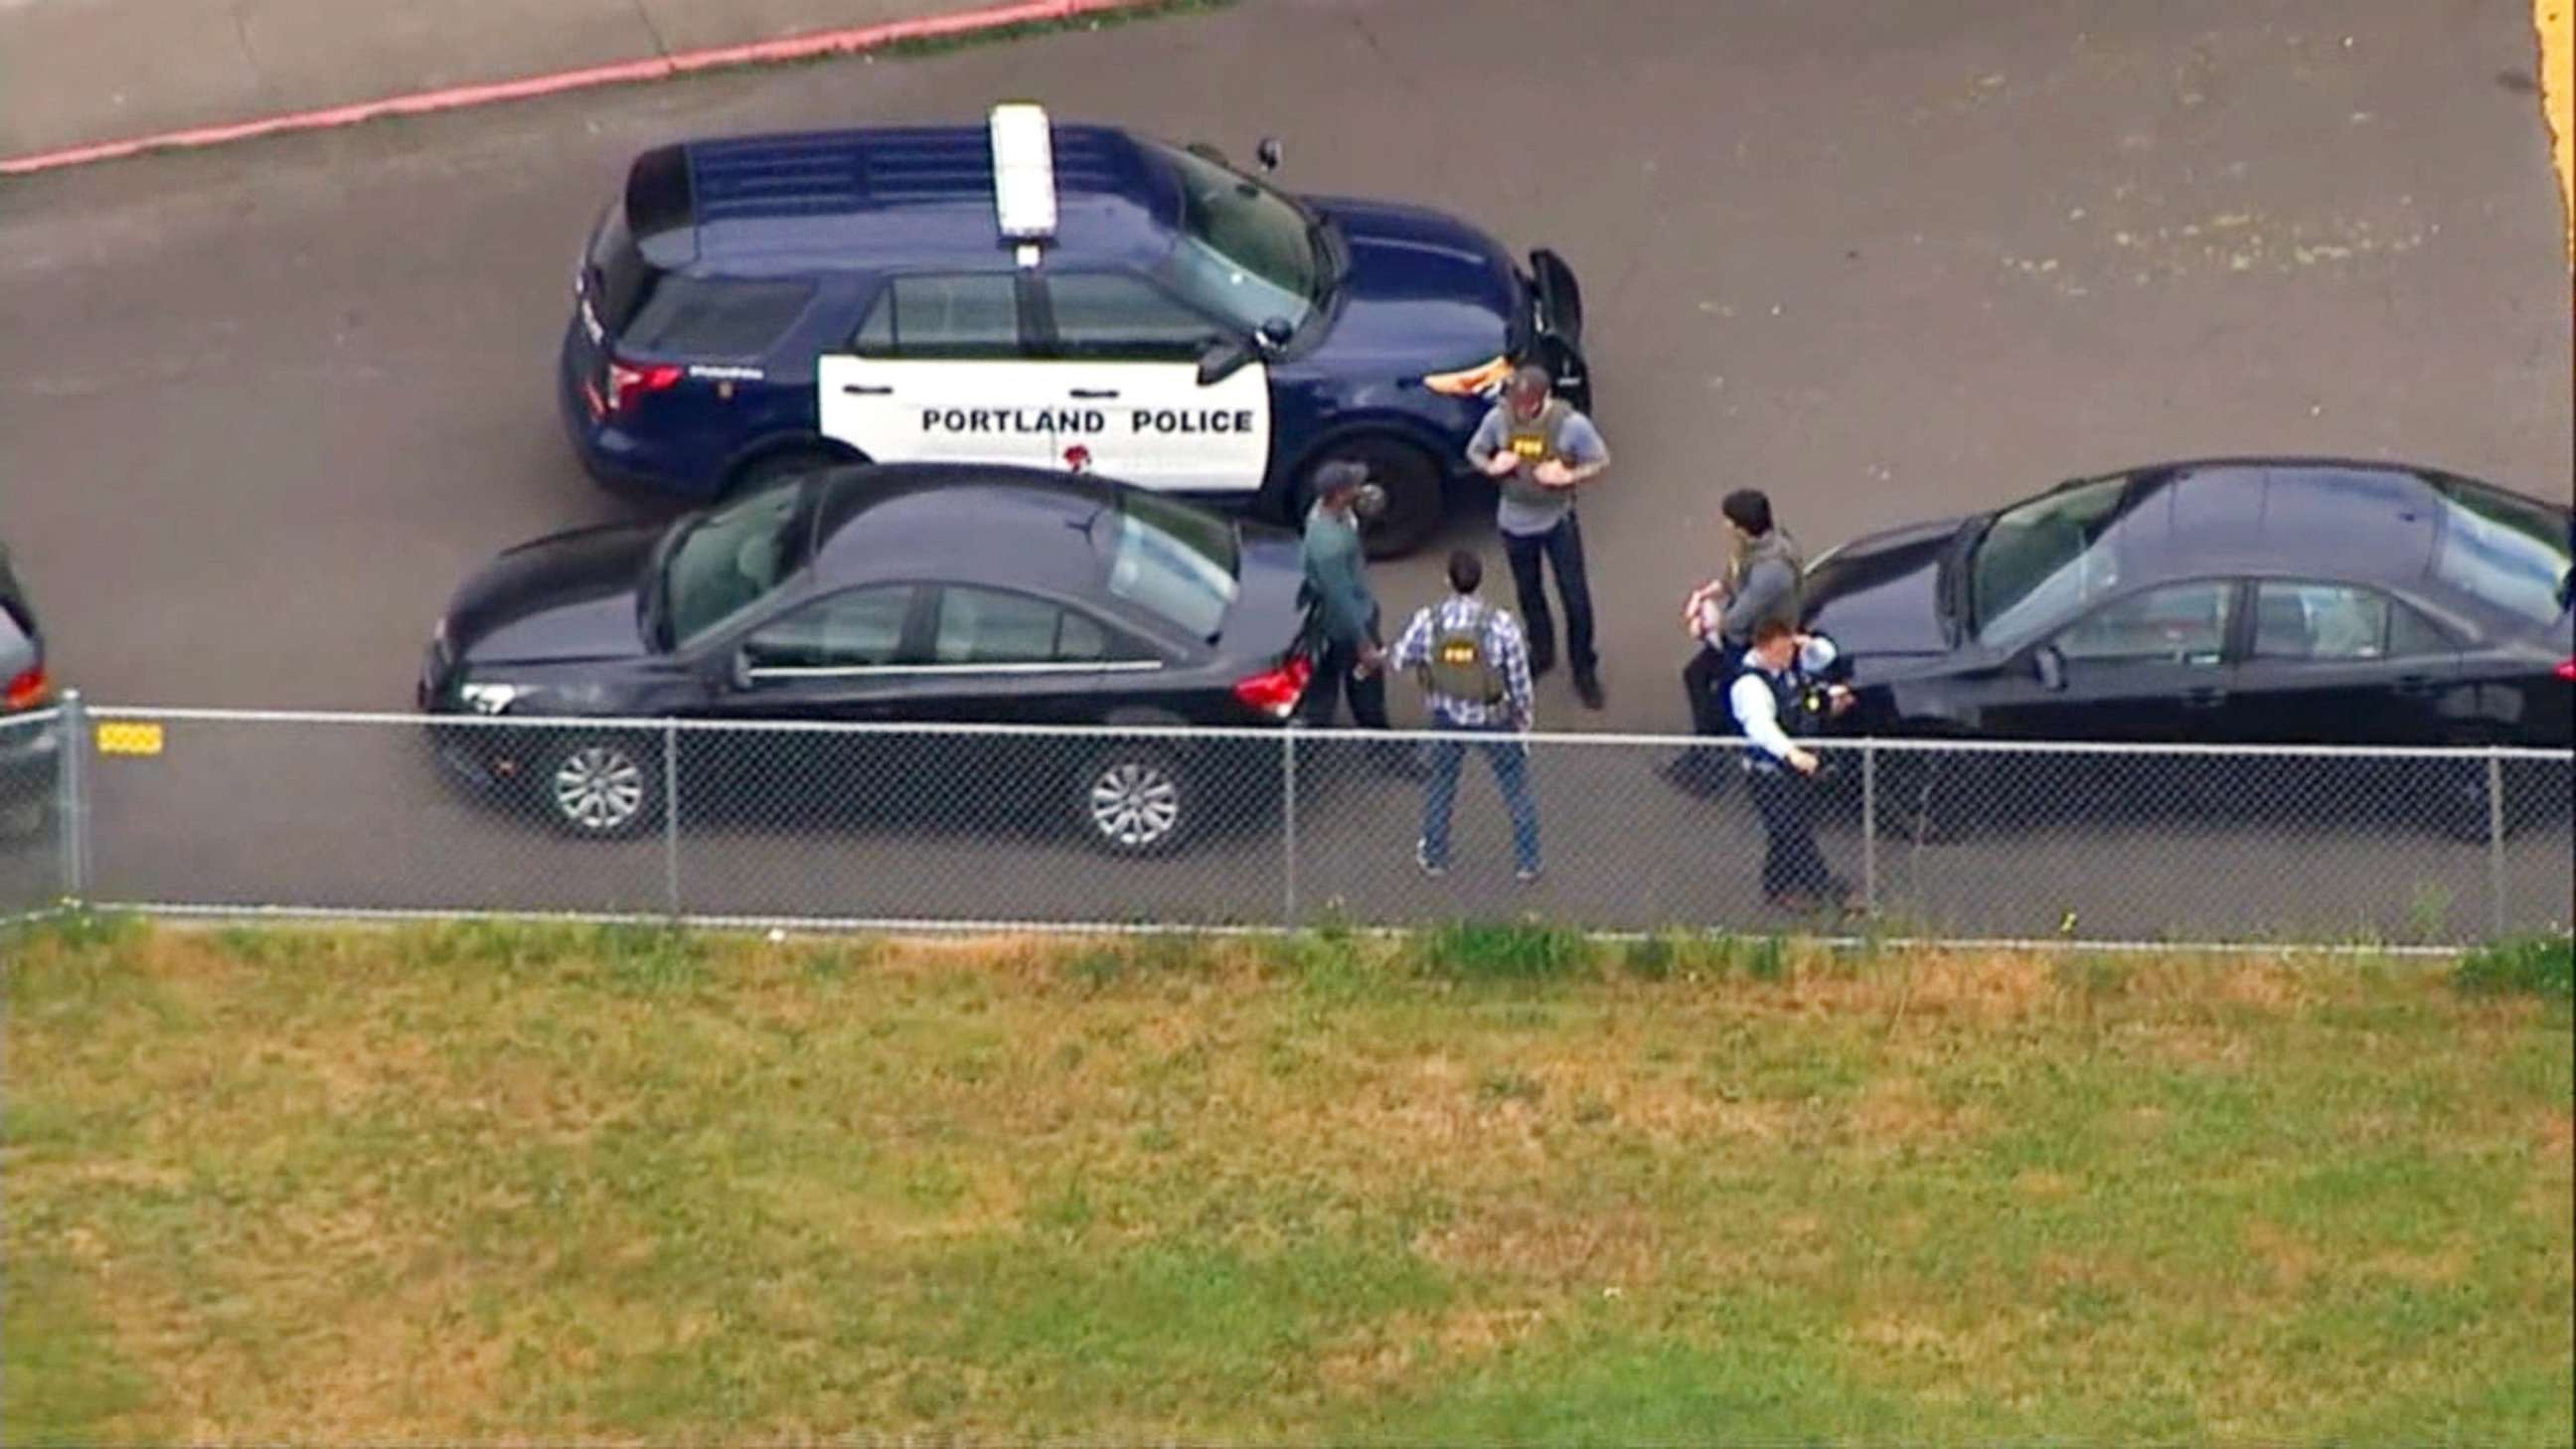 PHOTO: Officers responded to a call regarding a man armed with a gun near Parkrose High School, Portland, Ore.